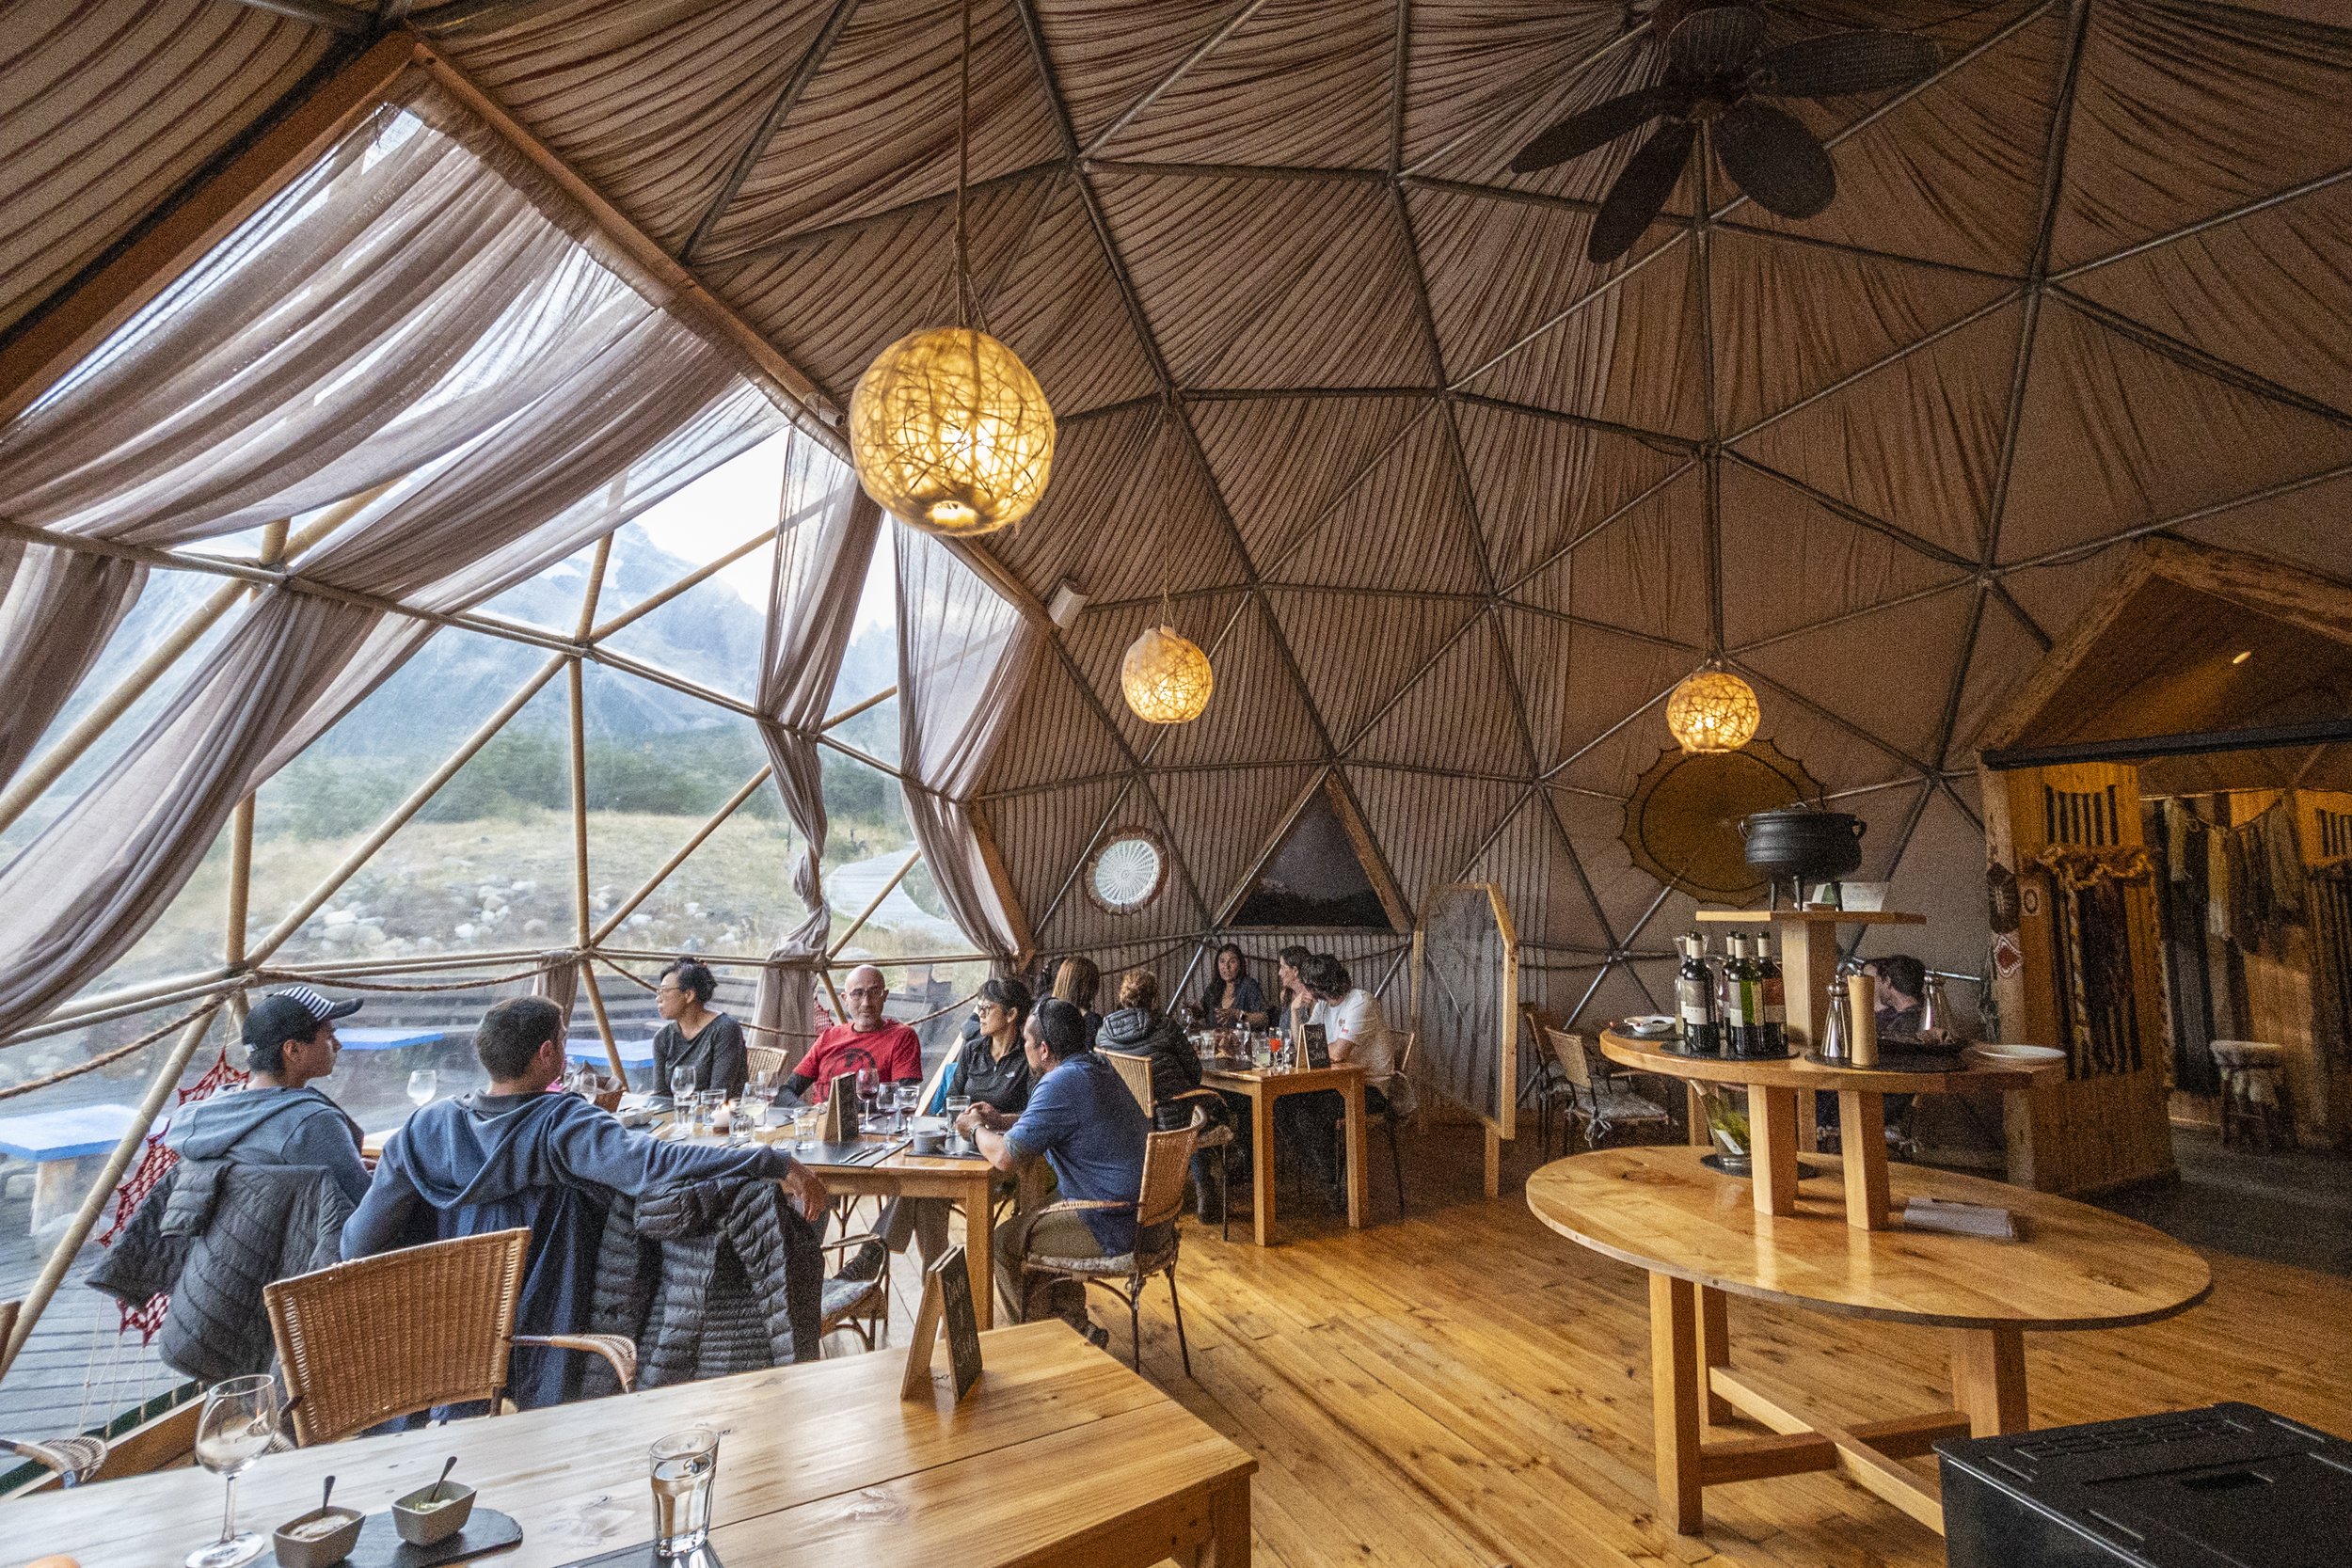 community-domes-restaurant-at-ecocamp-patagonia-torres-del-paine-chile_51863933081_o.jpg